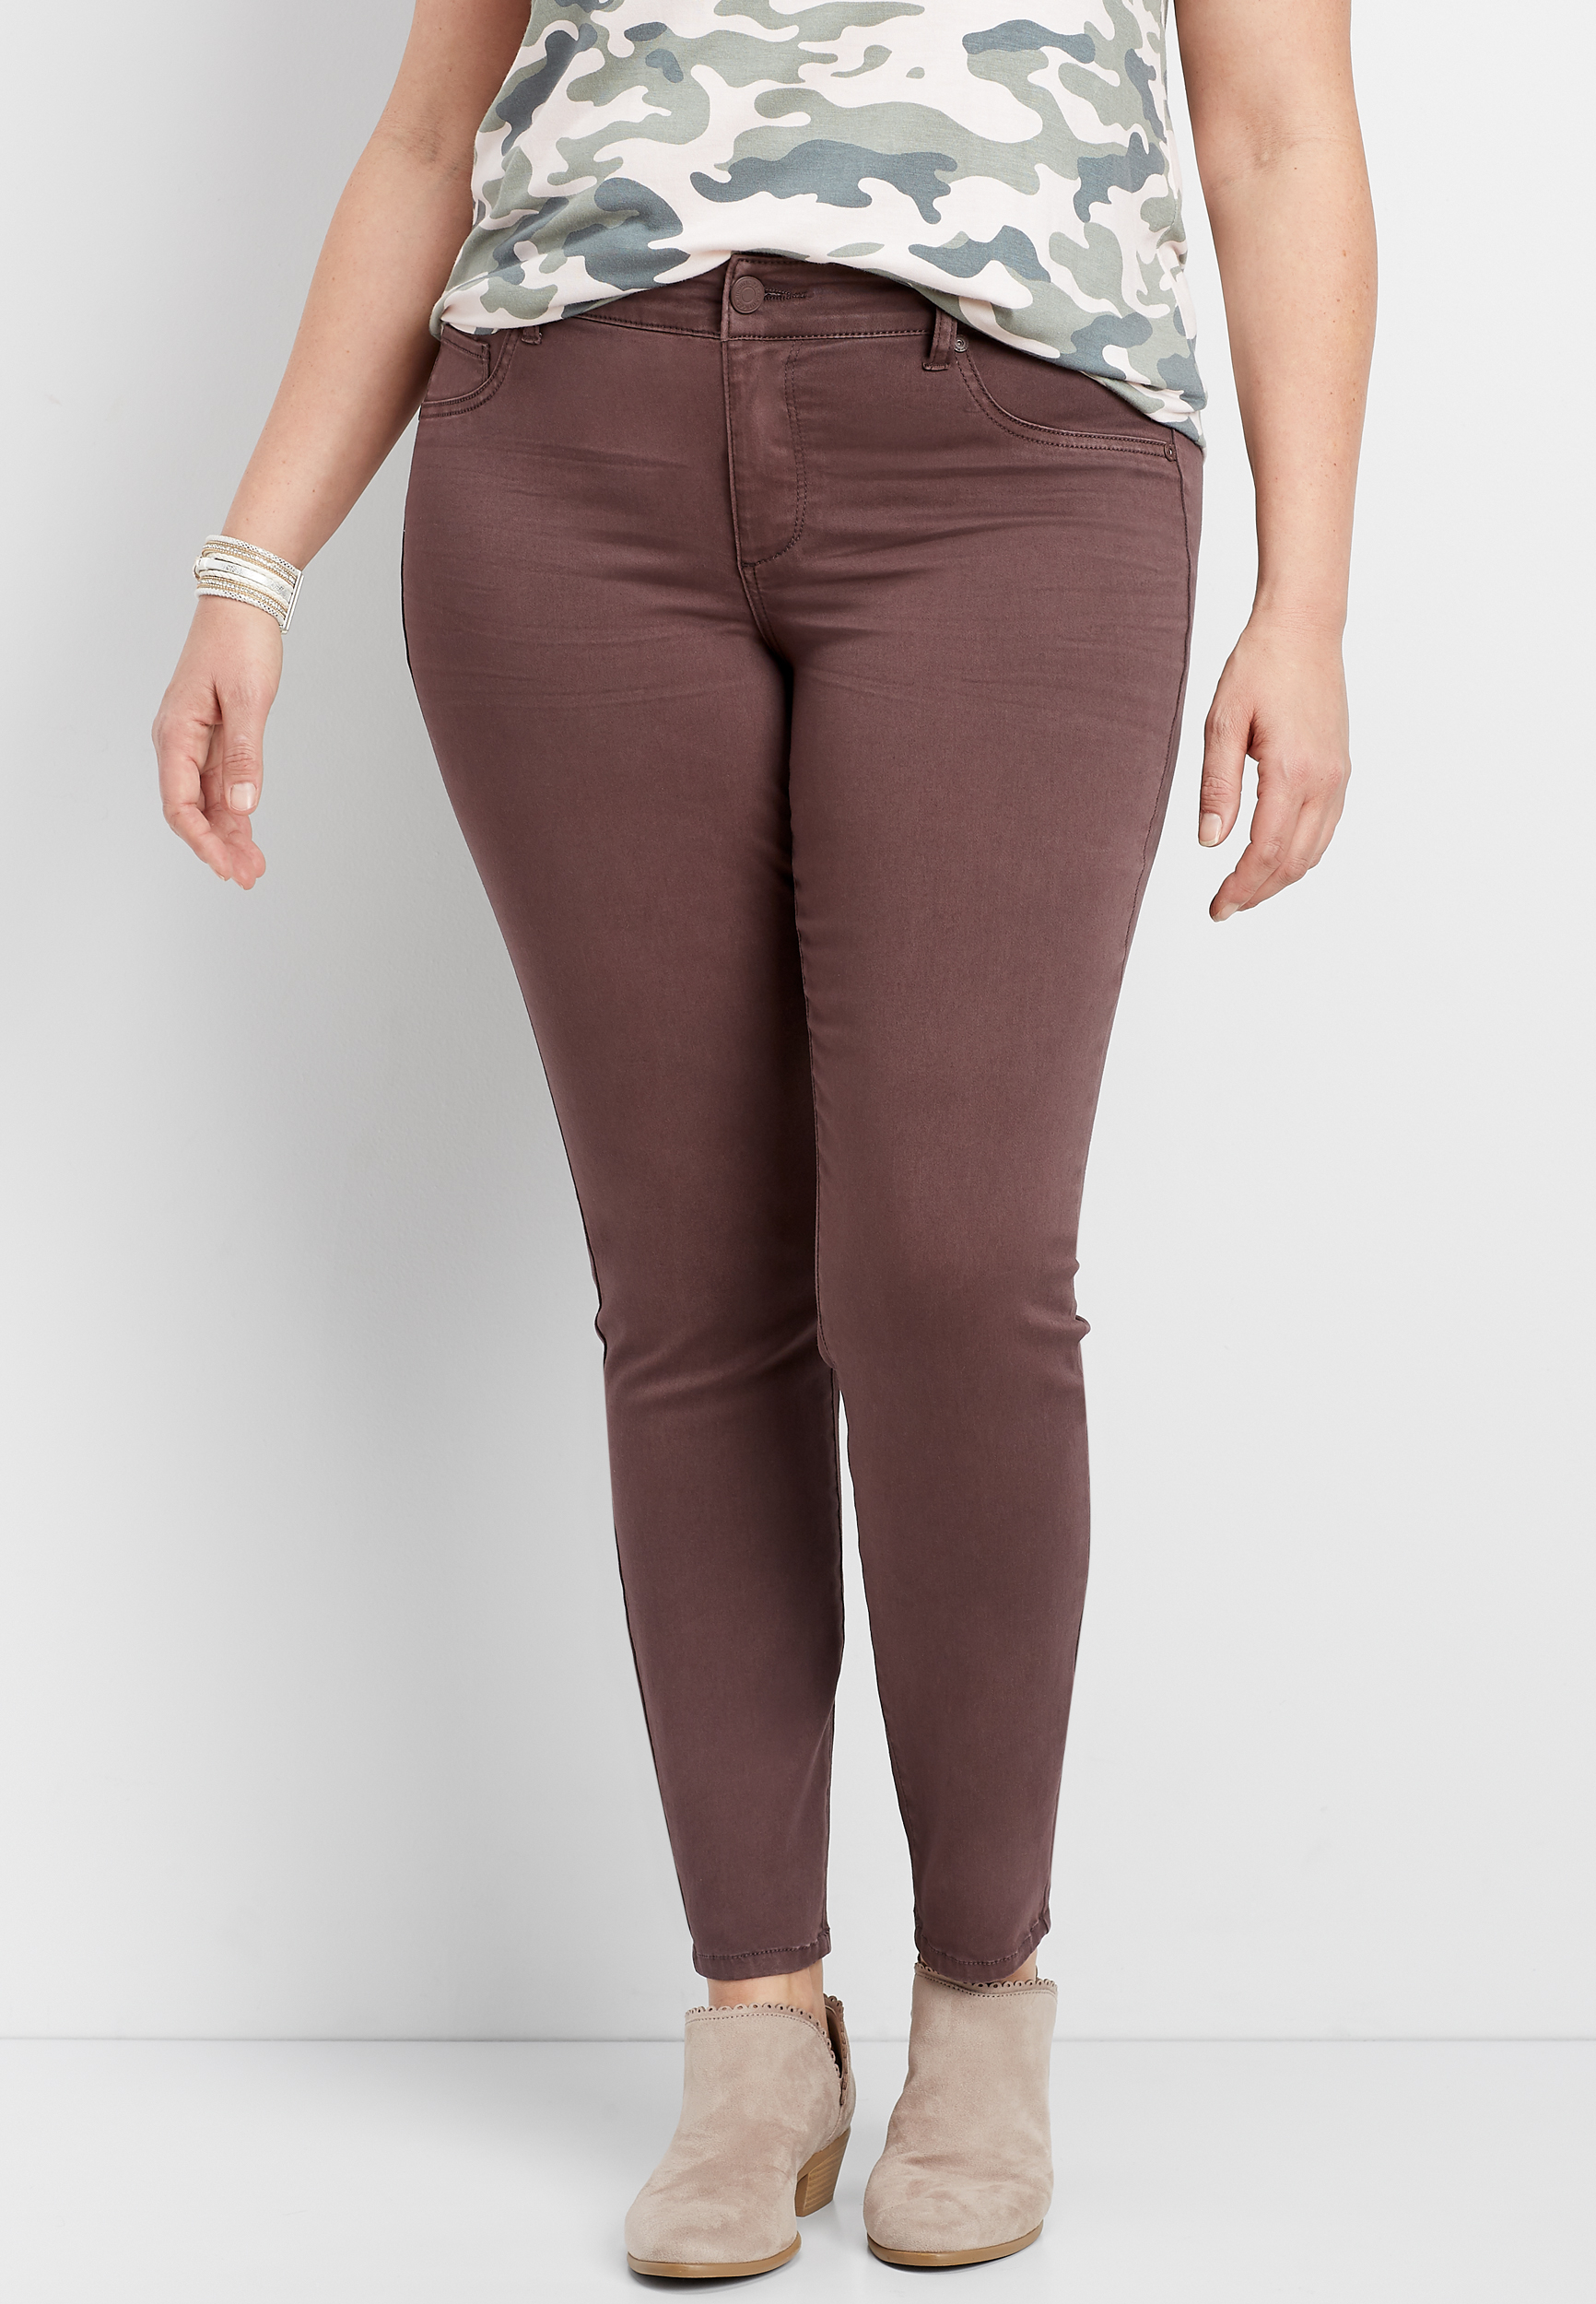 maurices jeggings size chart